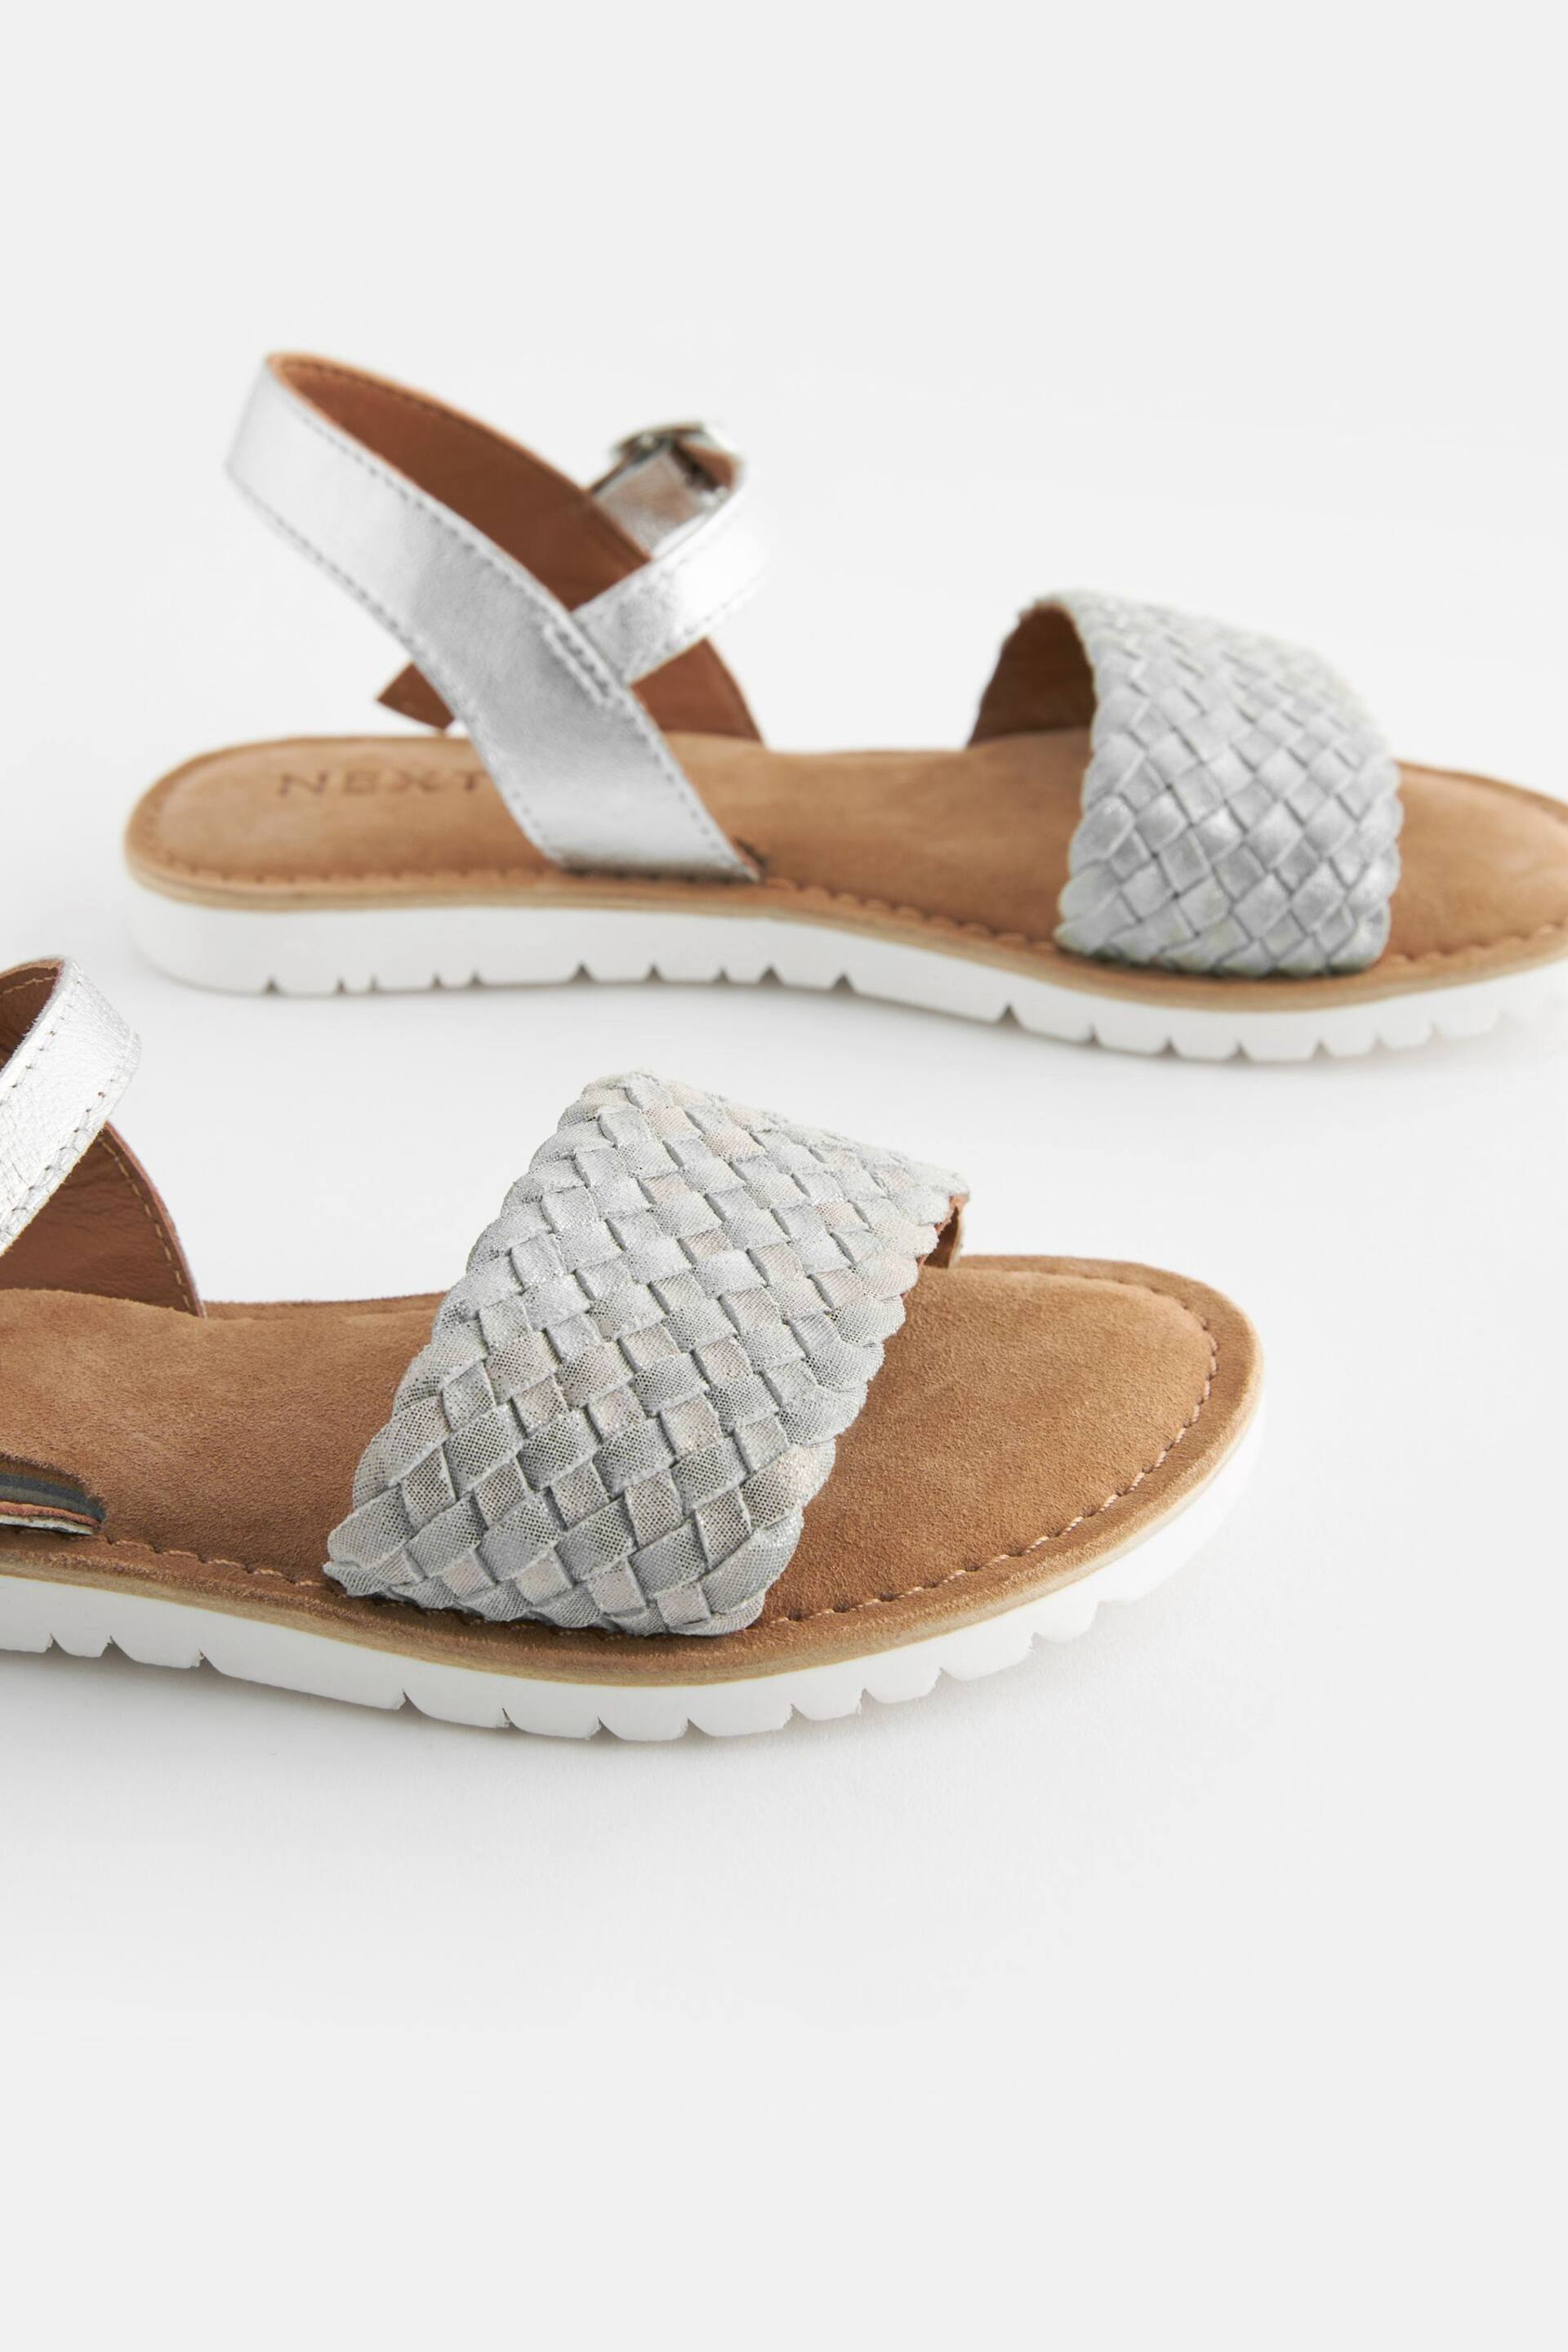 Silver Leather Woven Sandals - Image 4 of 6